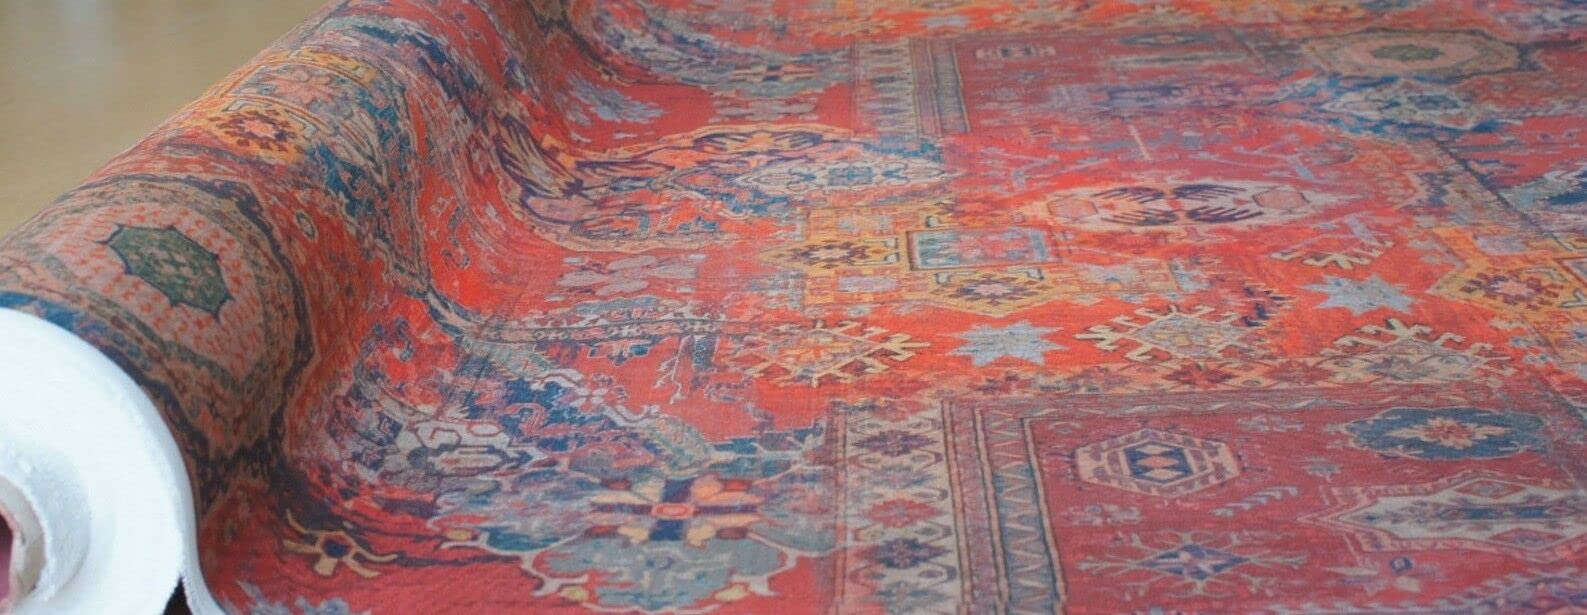 Rug Cotton Fabric Sold by The Meter Red Sewing Material by The Yard Kilim Pattern Vintage Style Great for Upholstery Pillows Arts Crafts